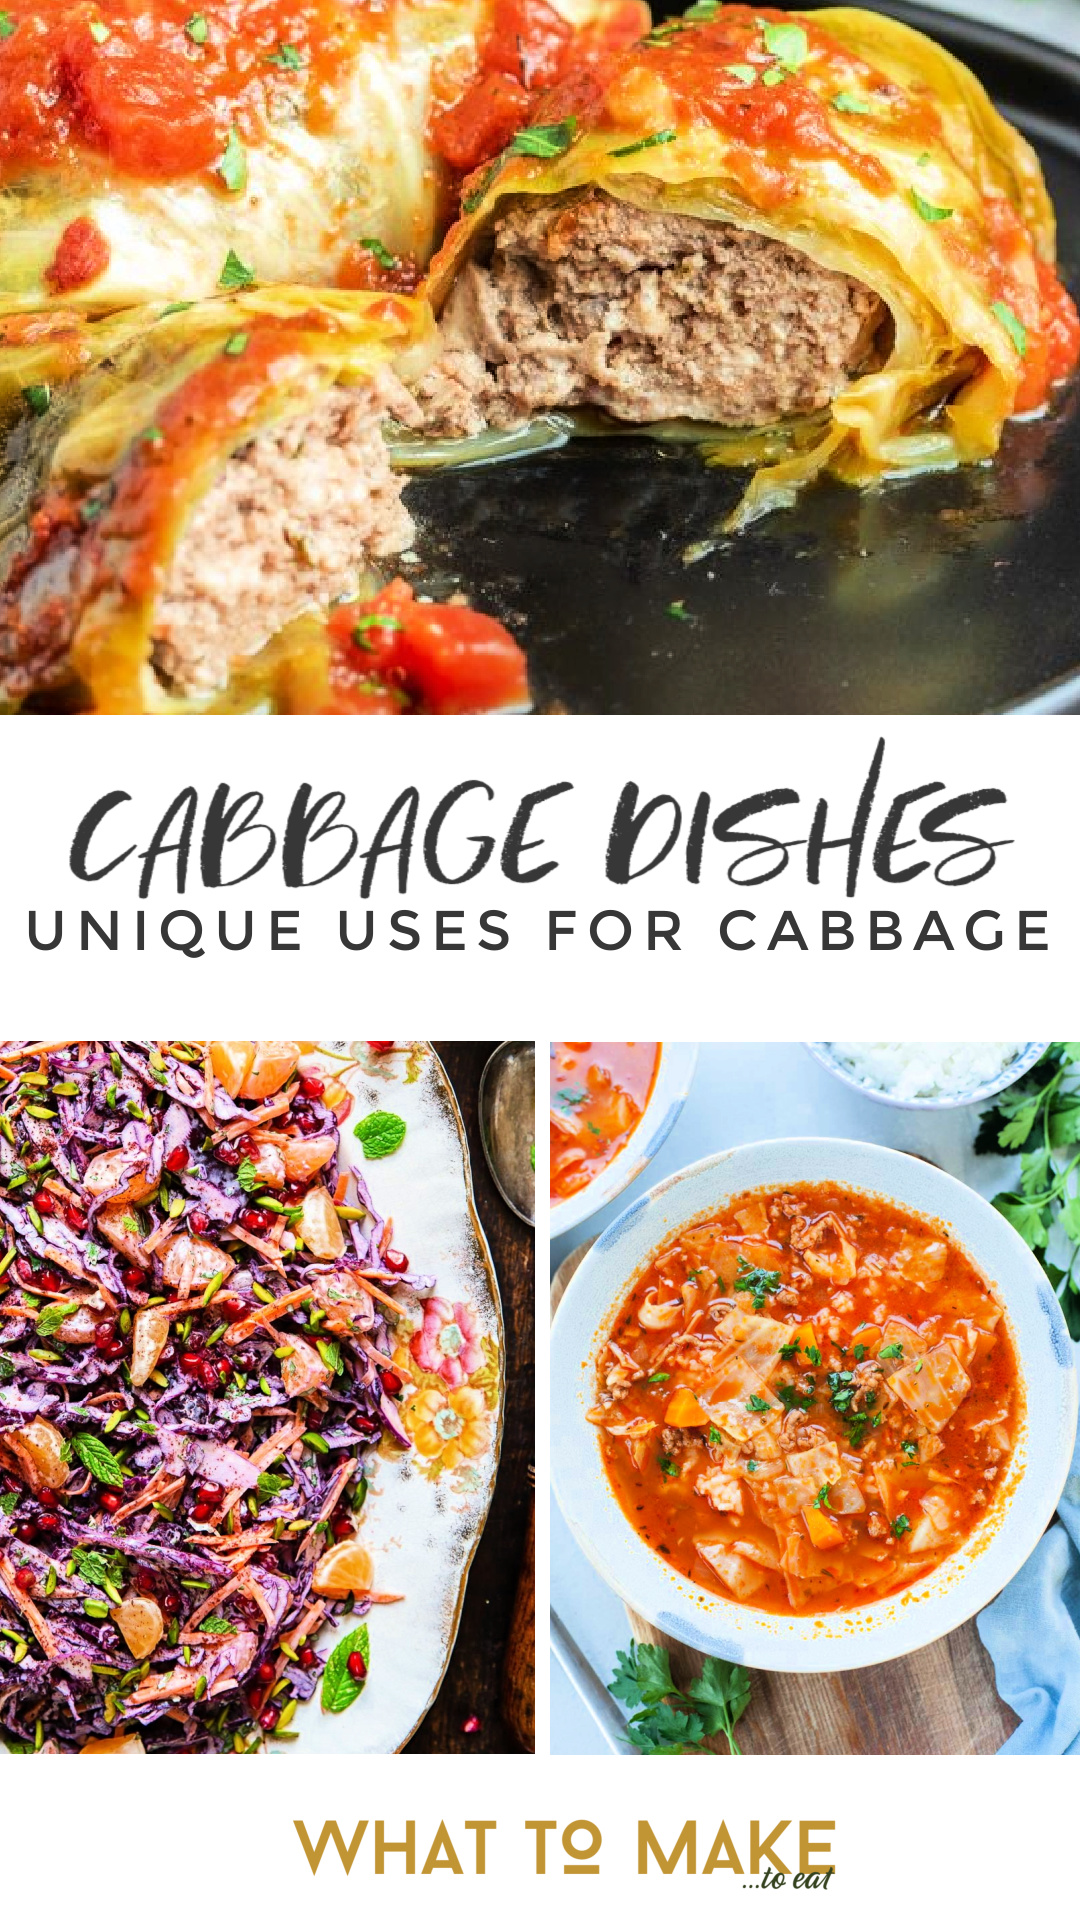 Collage of cabbage dishes. Text reads "Cabbage dishes, unique uses for cabbage."